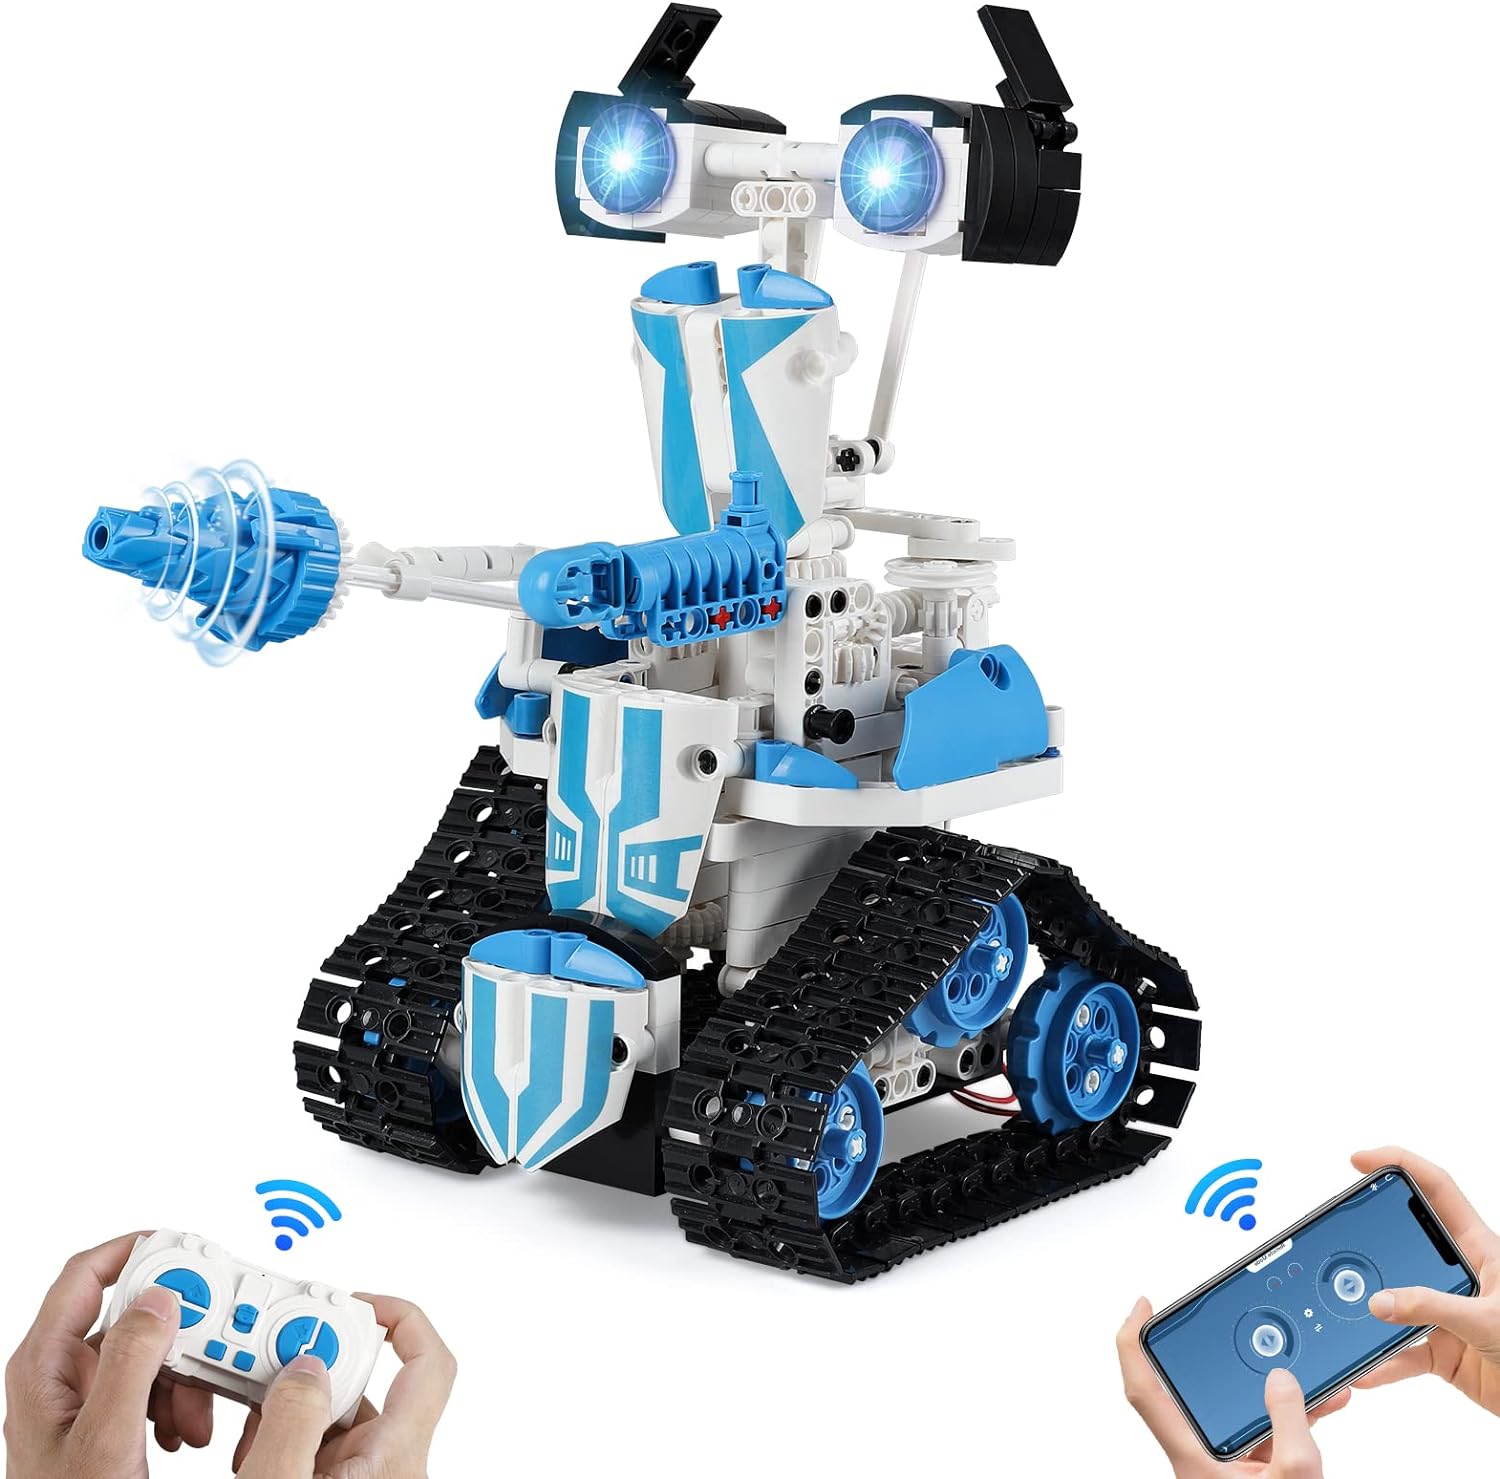 AOKESI Robot Building Toys for Kids Ages 8-12, Remote and APP Controlled Building Block Robot Kits, STEM Projects Building Set Birthday Gifts for Teens Boys Girls (520 Pieces)